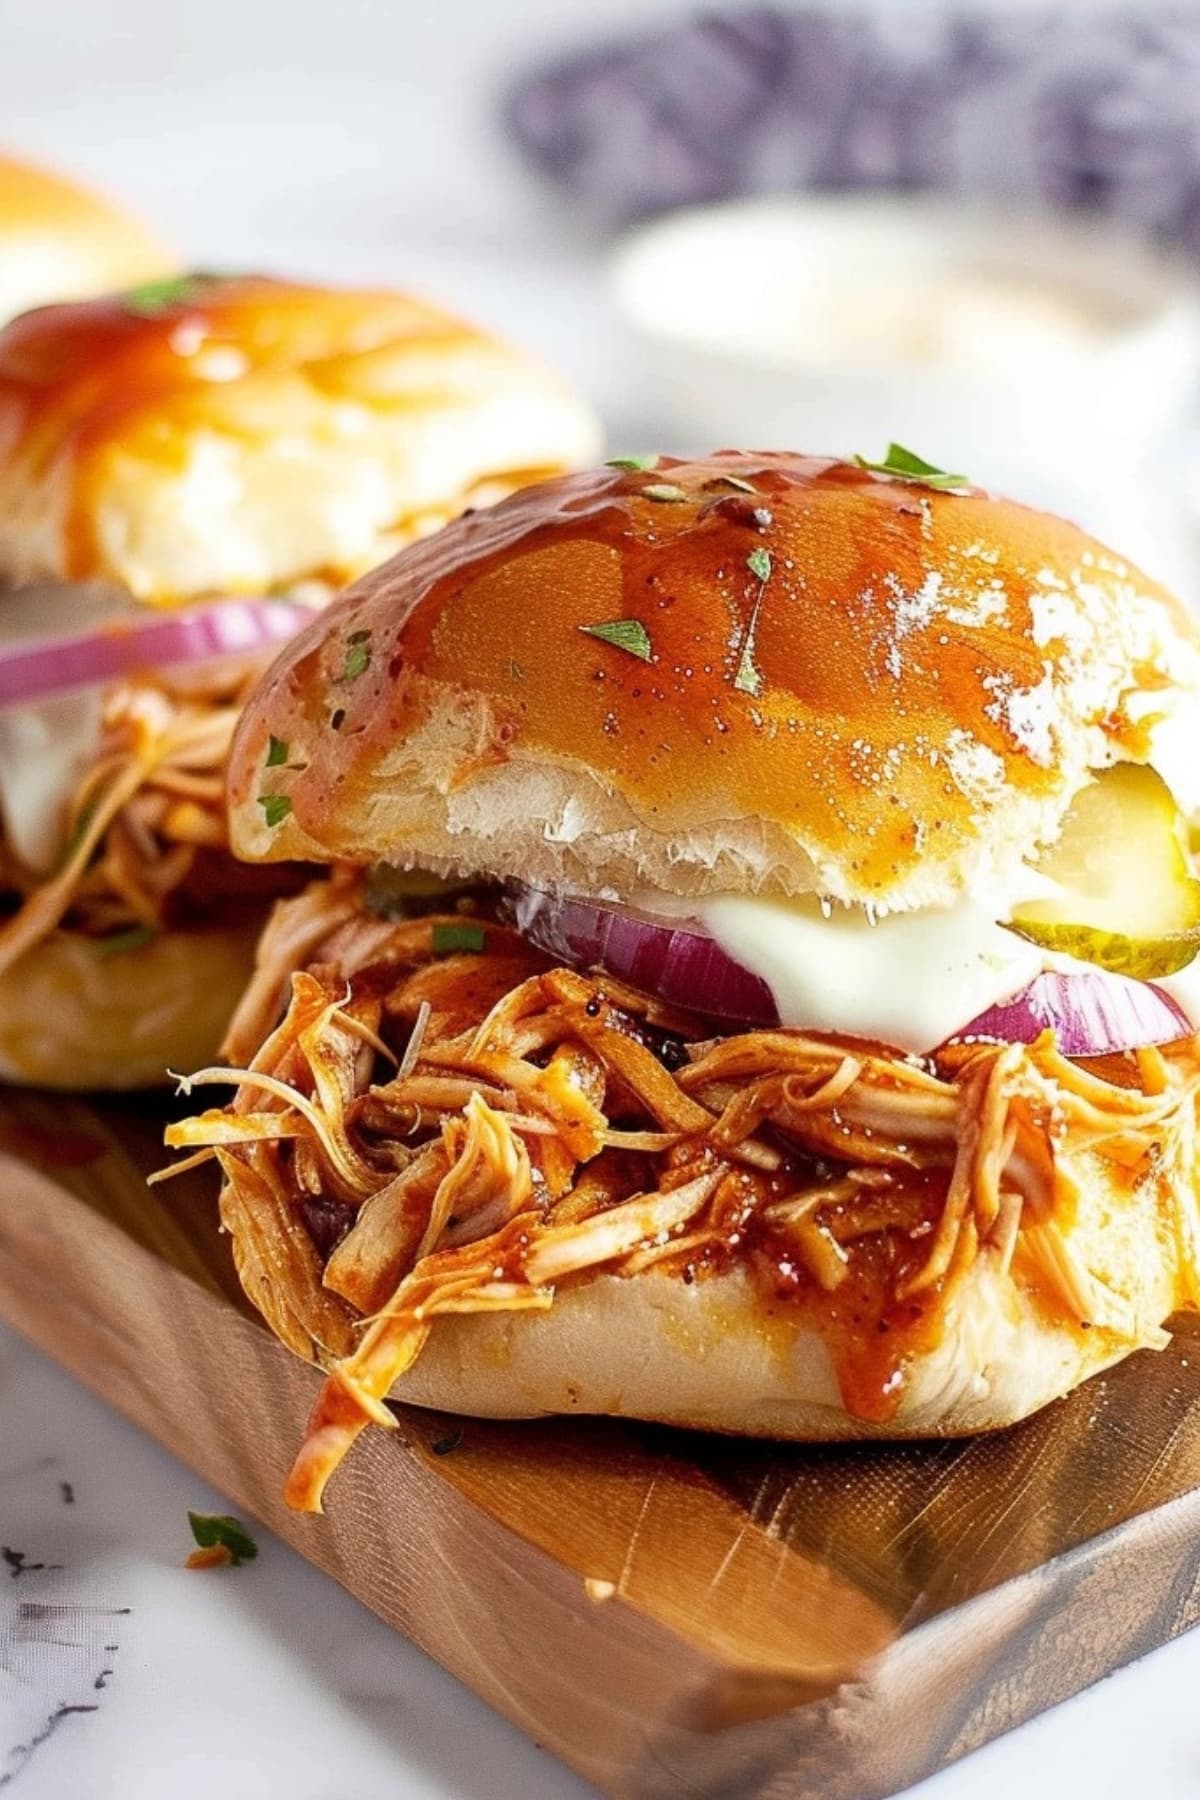 Slider rolls with cheesy BBQ chicken filling with onion and pickles.